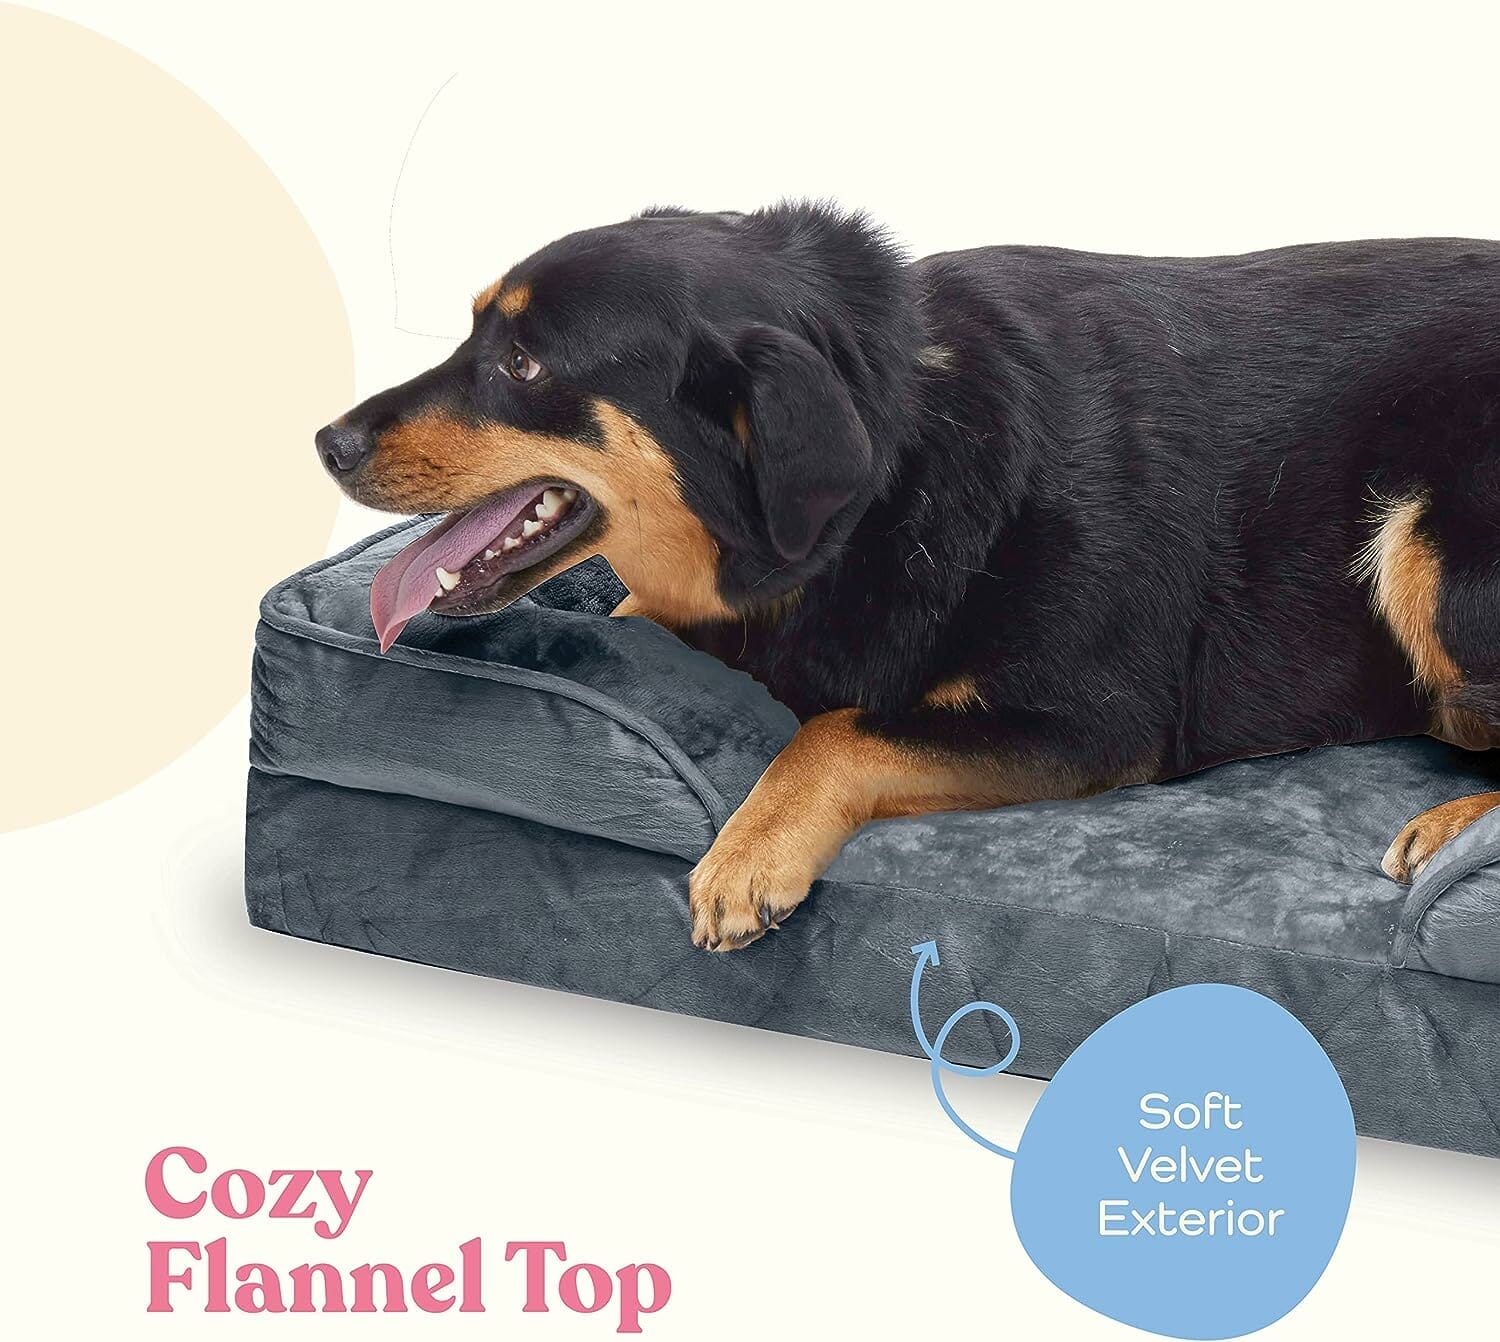 Orthopedic Sofa Dog Bed Review – The Ultimate Comfort for Your Pup?